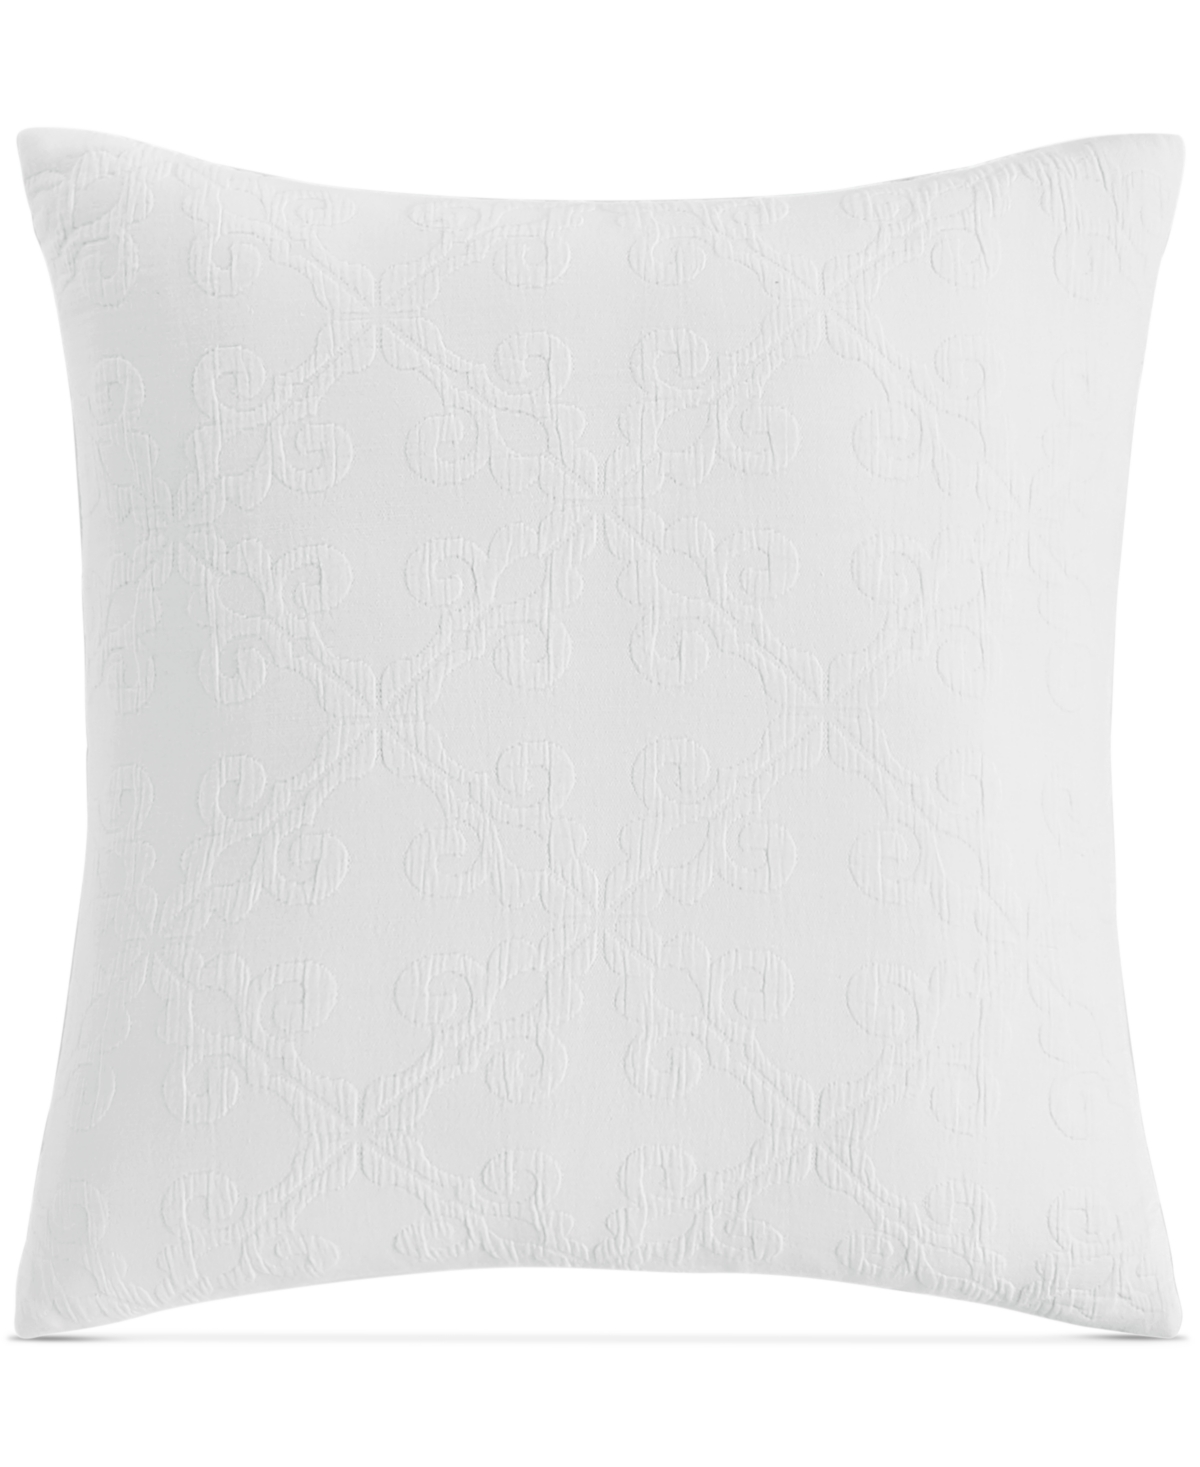 Charter Club Damask Designs Woven Tile Decorative Pillow, 18" x 18", Created for Macy's Bedding